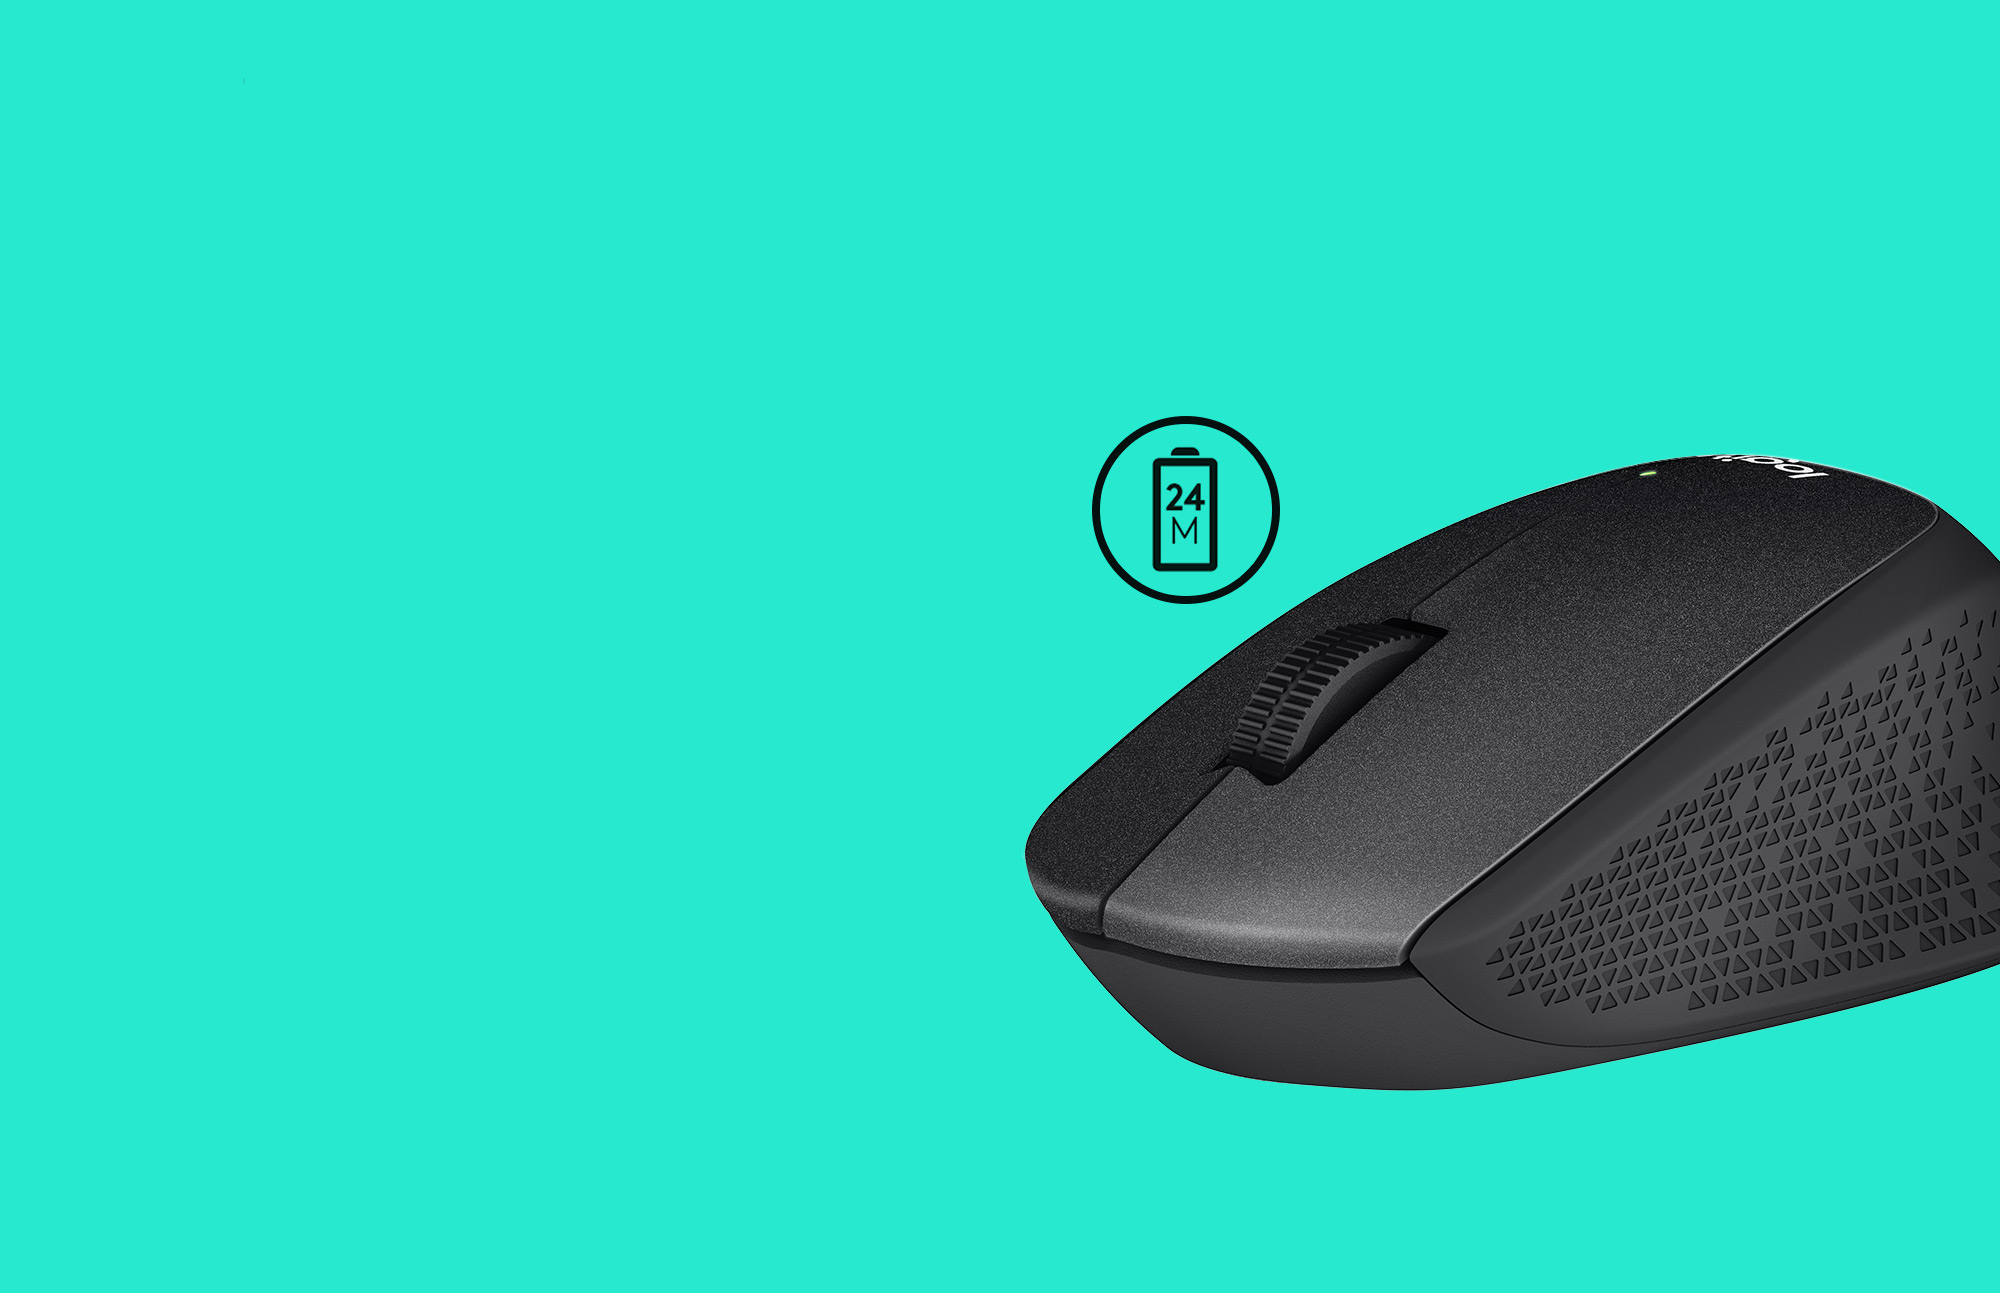 M330 mouse with teal back ground